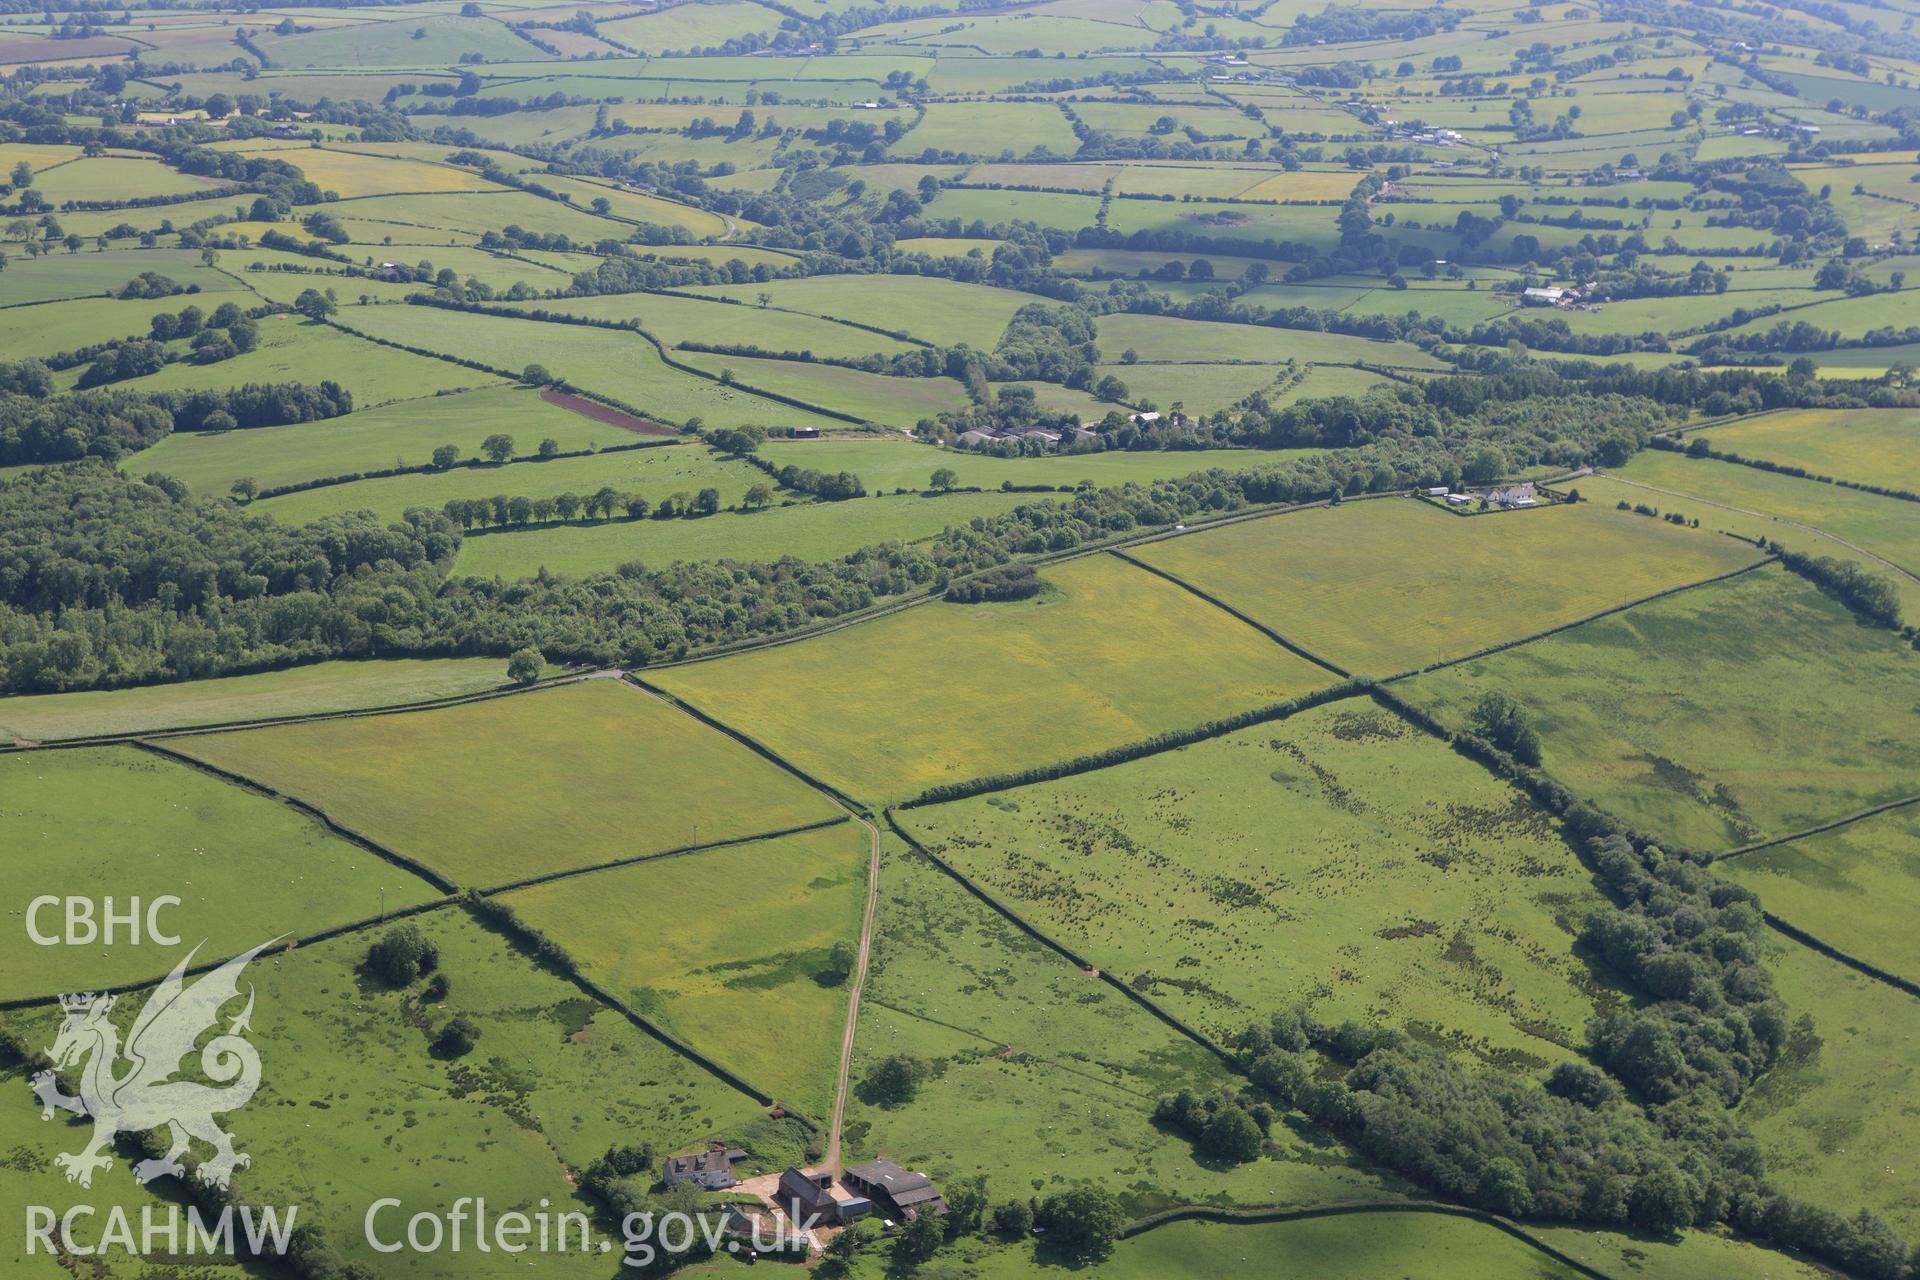 RCAHMW colour oblique aerial photograph of Campston Hill, near Llangattock Lingoed. Taken on 11 June 2009 by Toby Driver